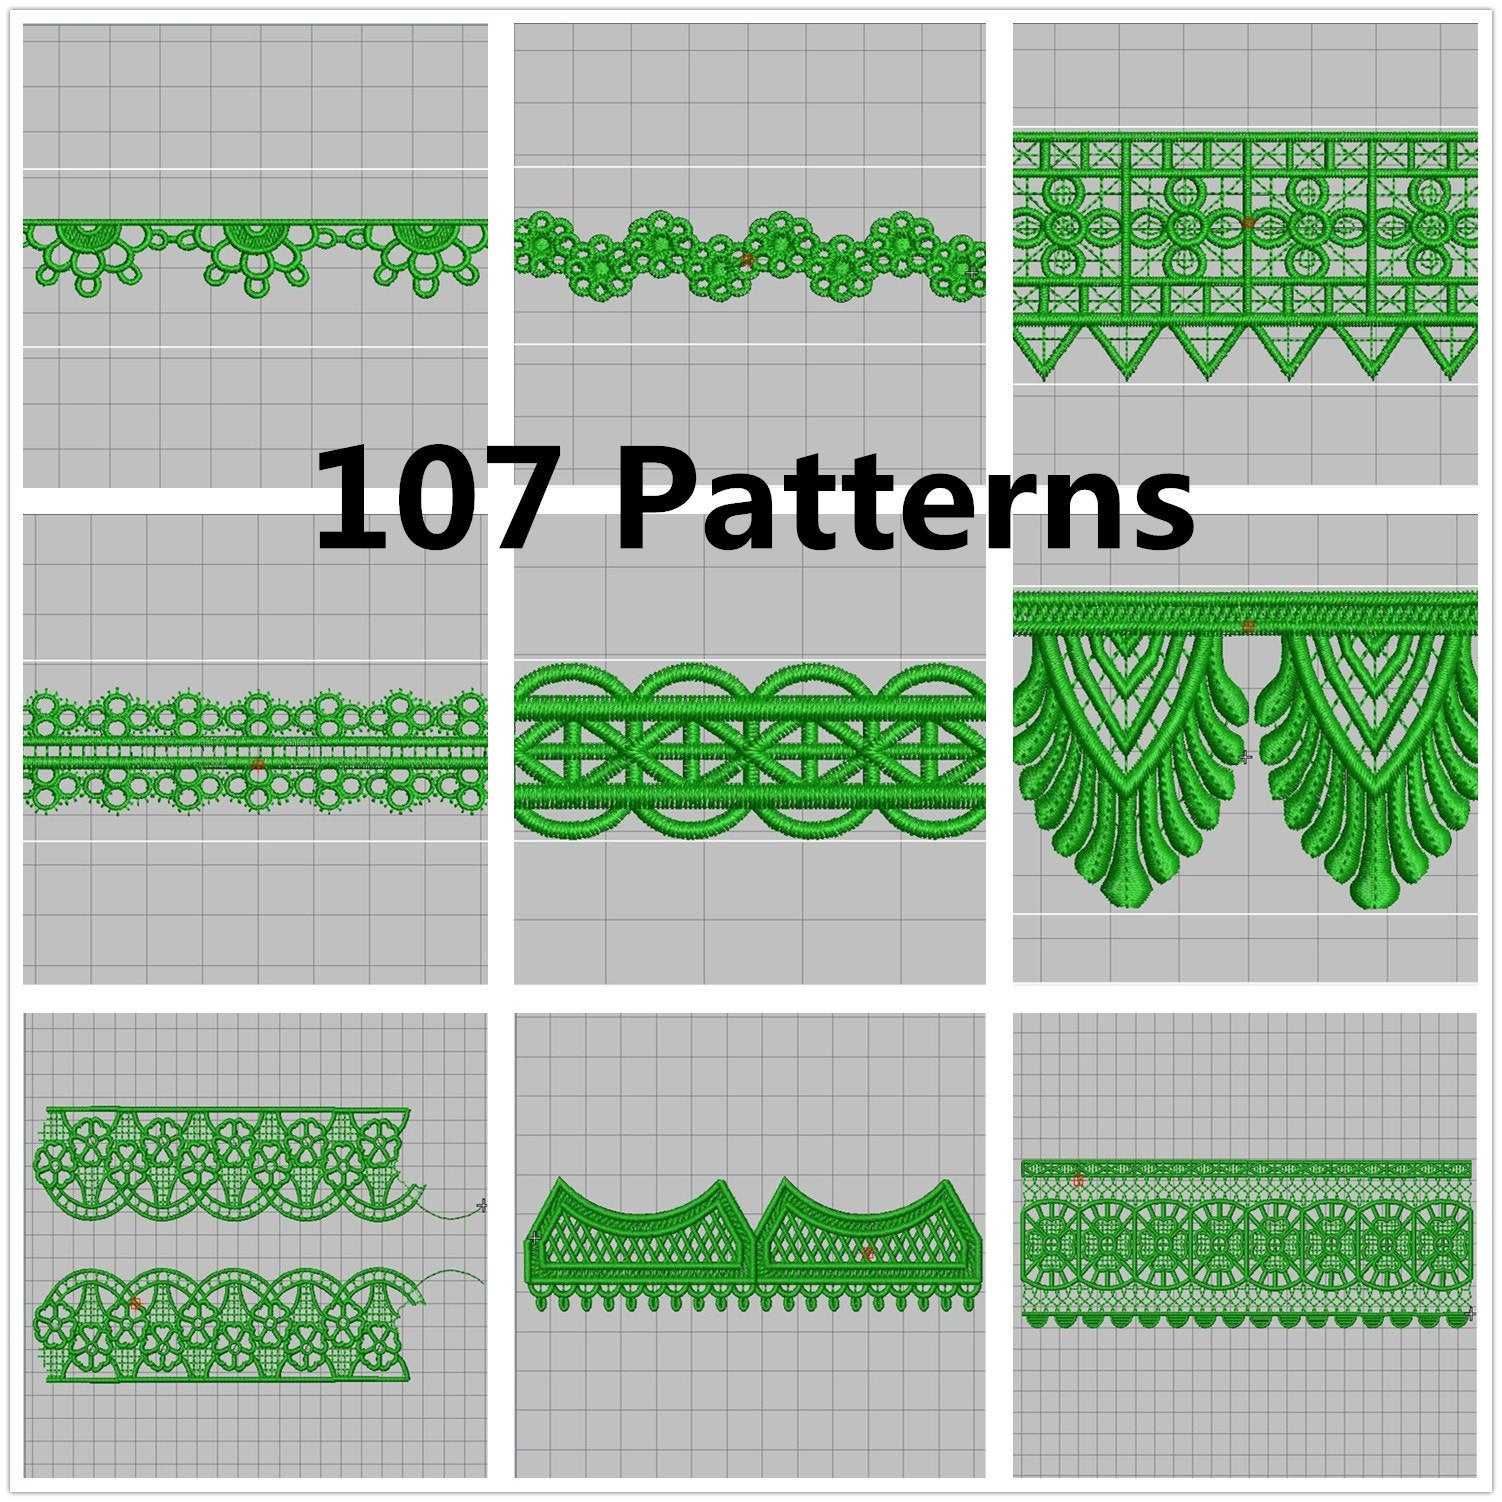 Machine Embroidery Lace Patterns 107 Patterns Lace Pattern Lock Pattern Embroidery Machine Embroidery Design Embroidery Pattern Material Dst